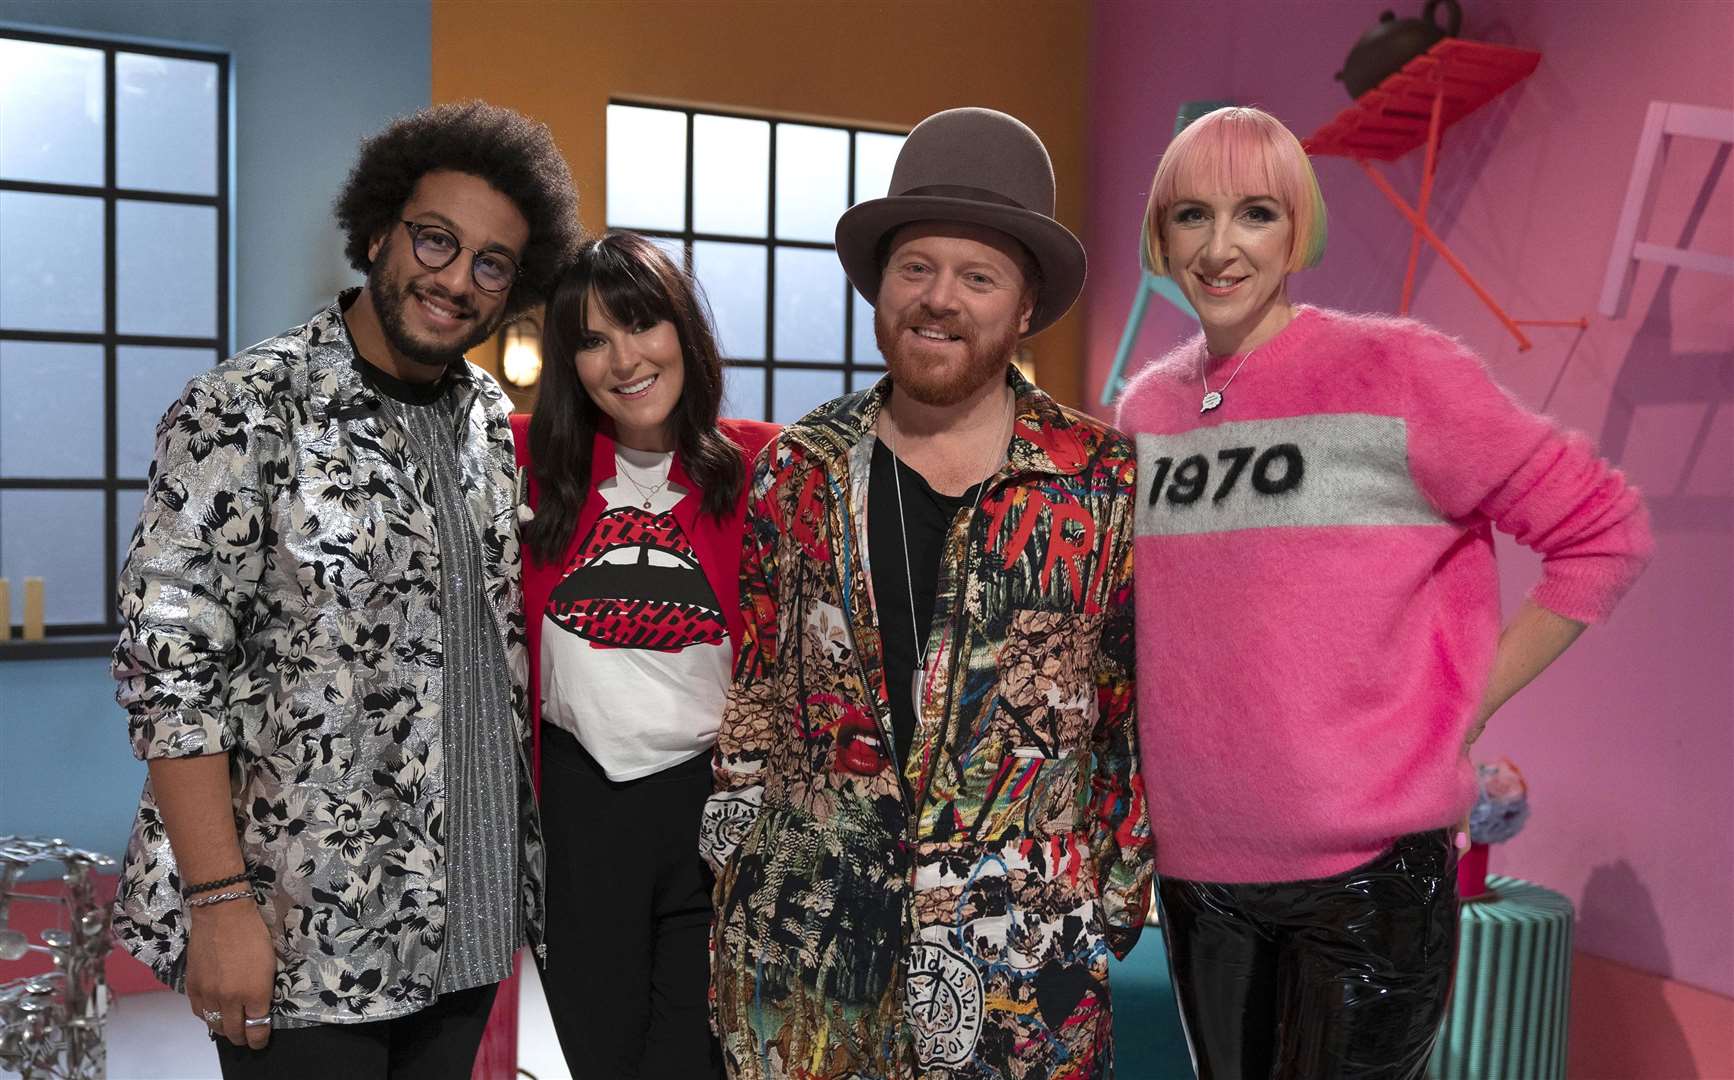 Harriet Vine MBE, Zak Khchai, Keith Lemon and Anna Richardson star in Channel 4 series The Fantastical Factory of Curious Craft. Picture: Channel 4